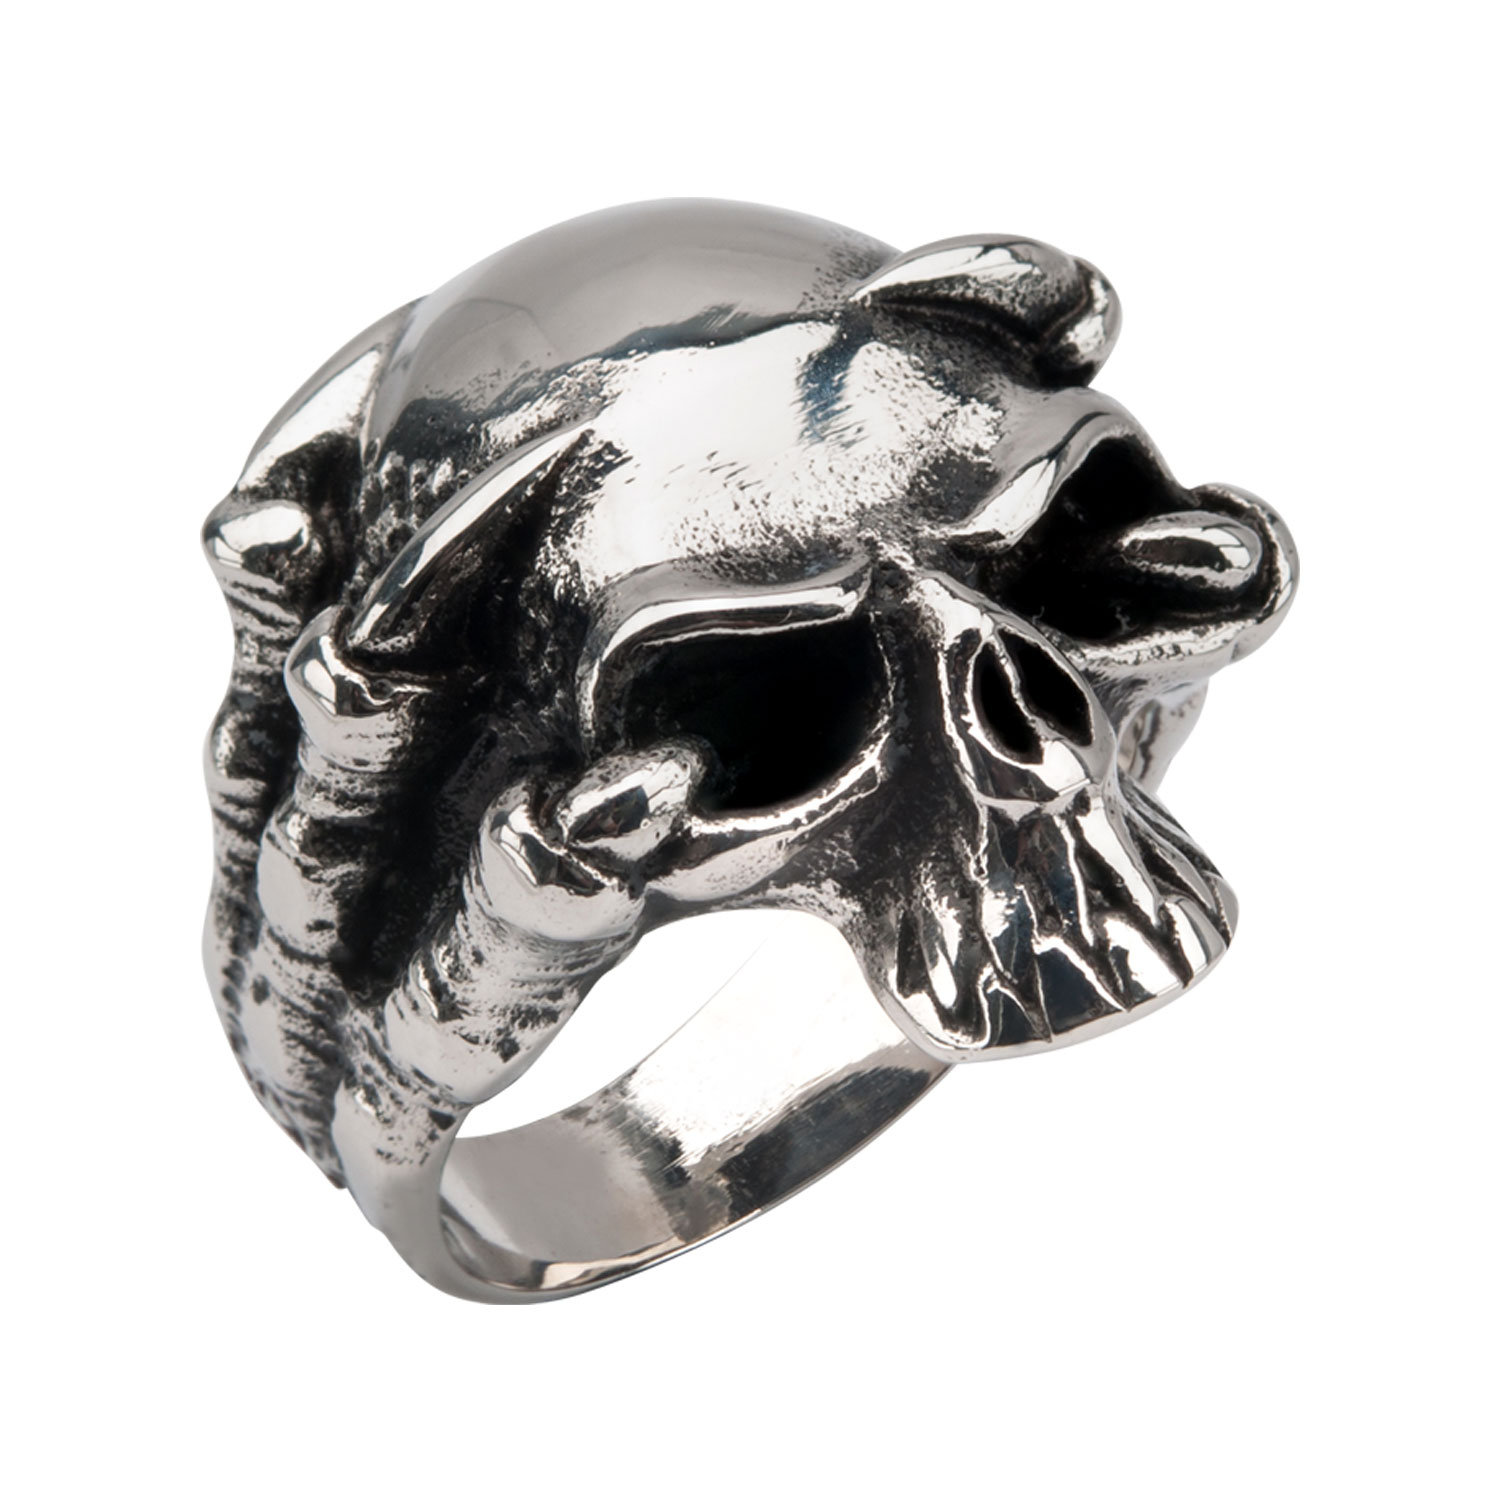 Black Oxidized Skull Ring with Claws Lewis Jewelers, Inc. Ansonia, CT